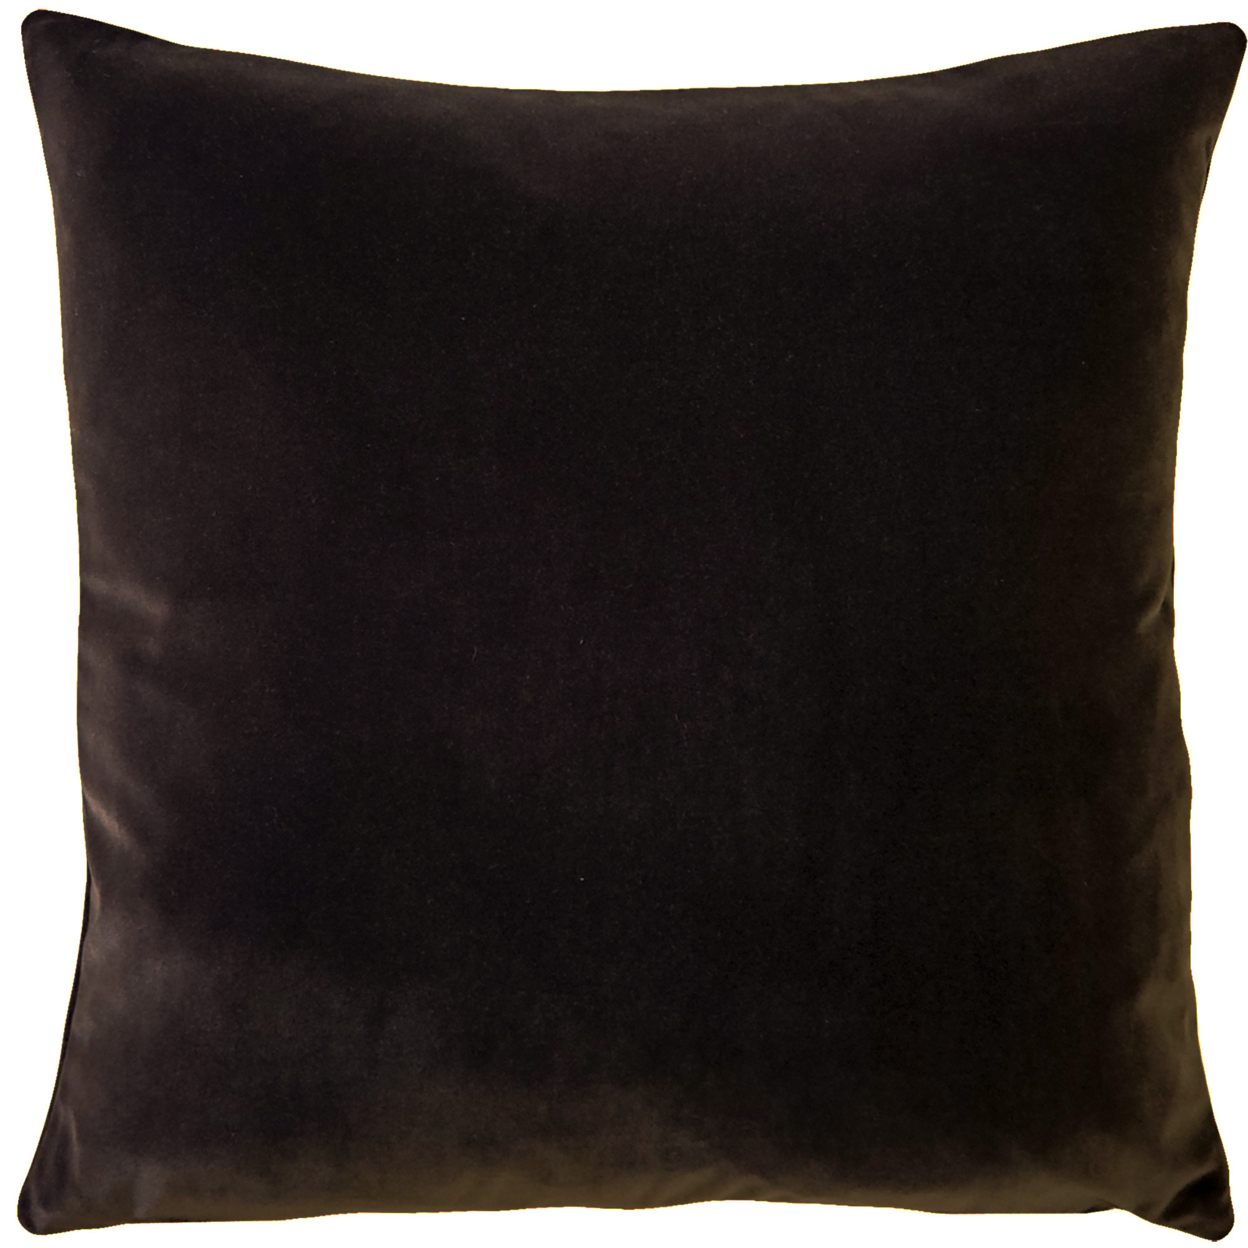 Castello Velvet Throw Pillows, Complete Pillow With Polyfill Pillow Insert (18 Colors, 3 Sizes) - Black, 20x20